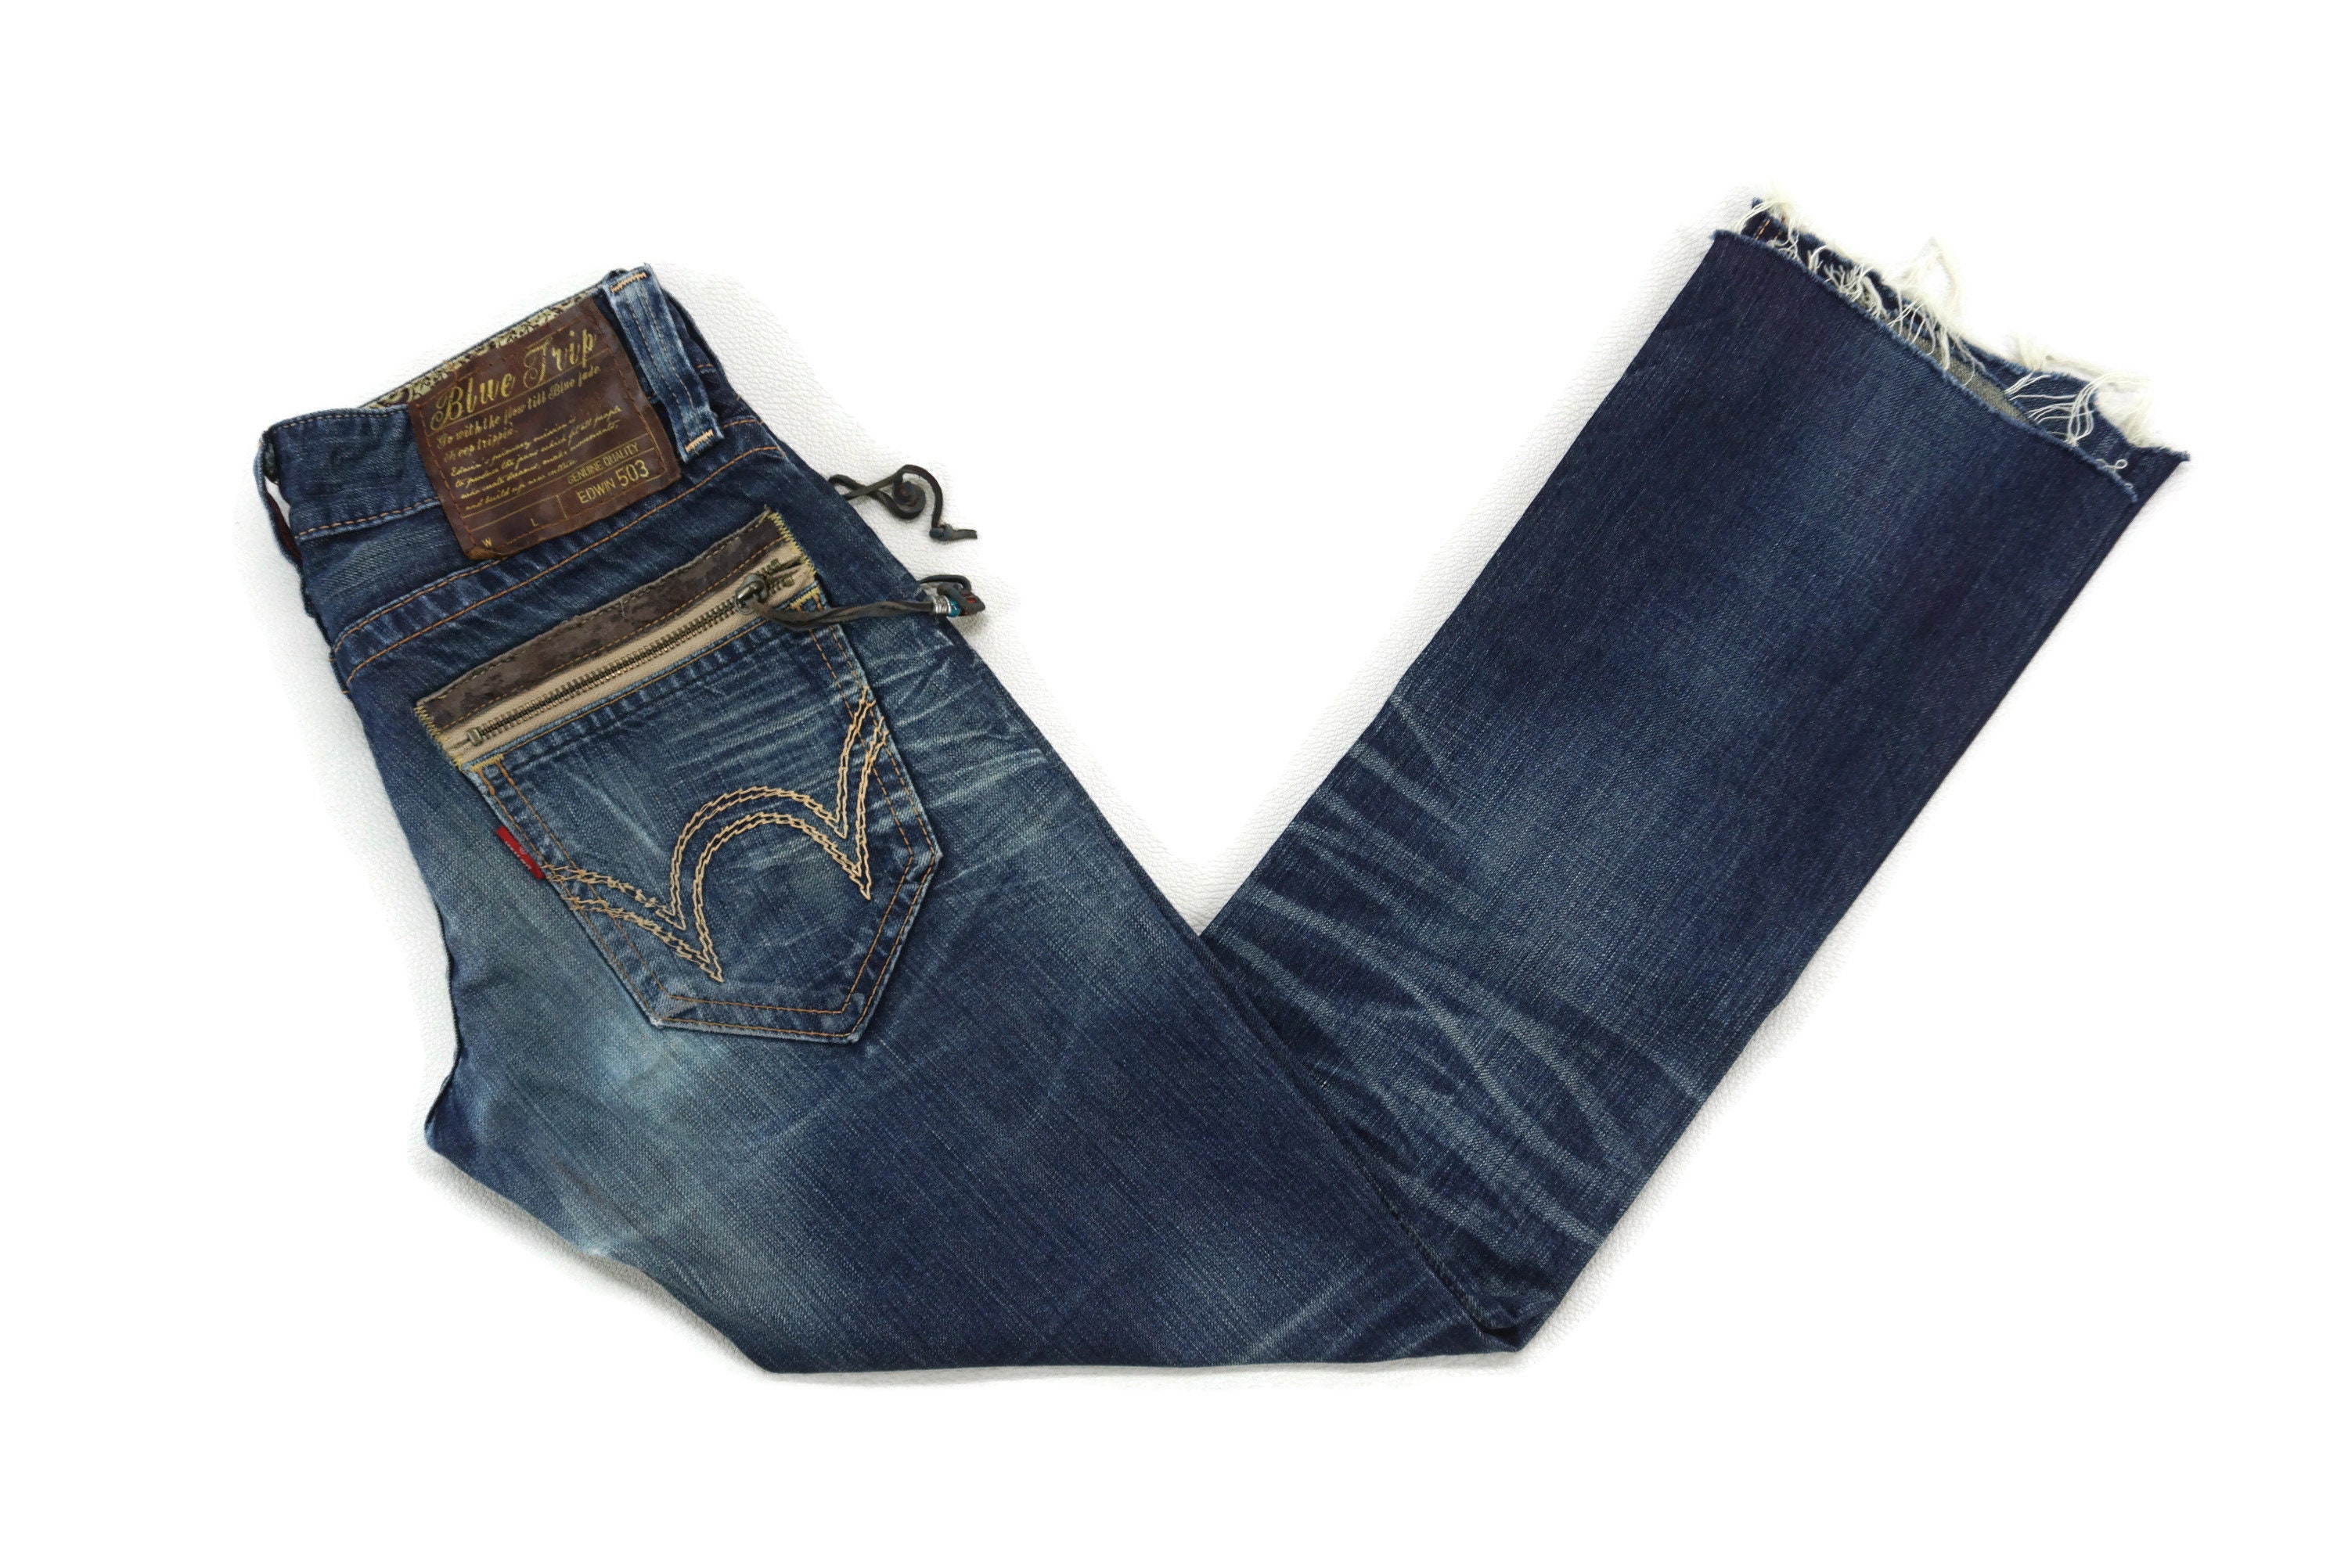 Men's Edwin Designer Jeans - French Baggy - Size 31-34 - $99.00 Retail |  Property Room